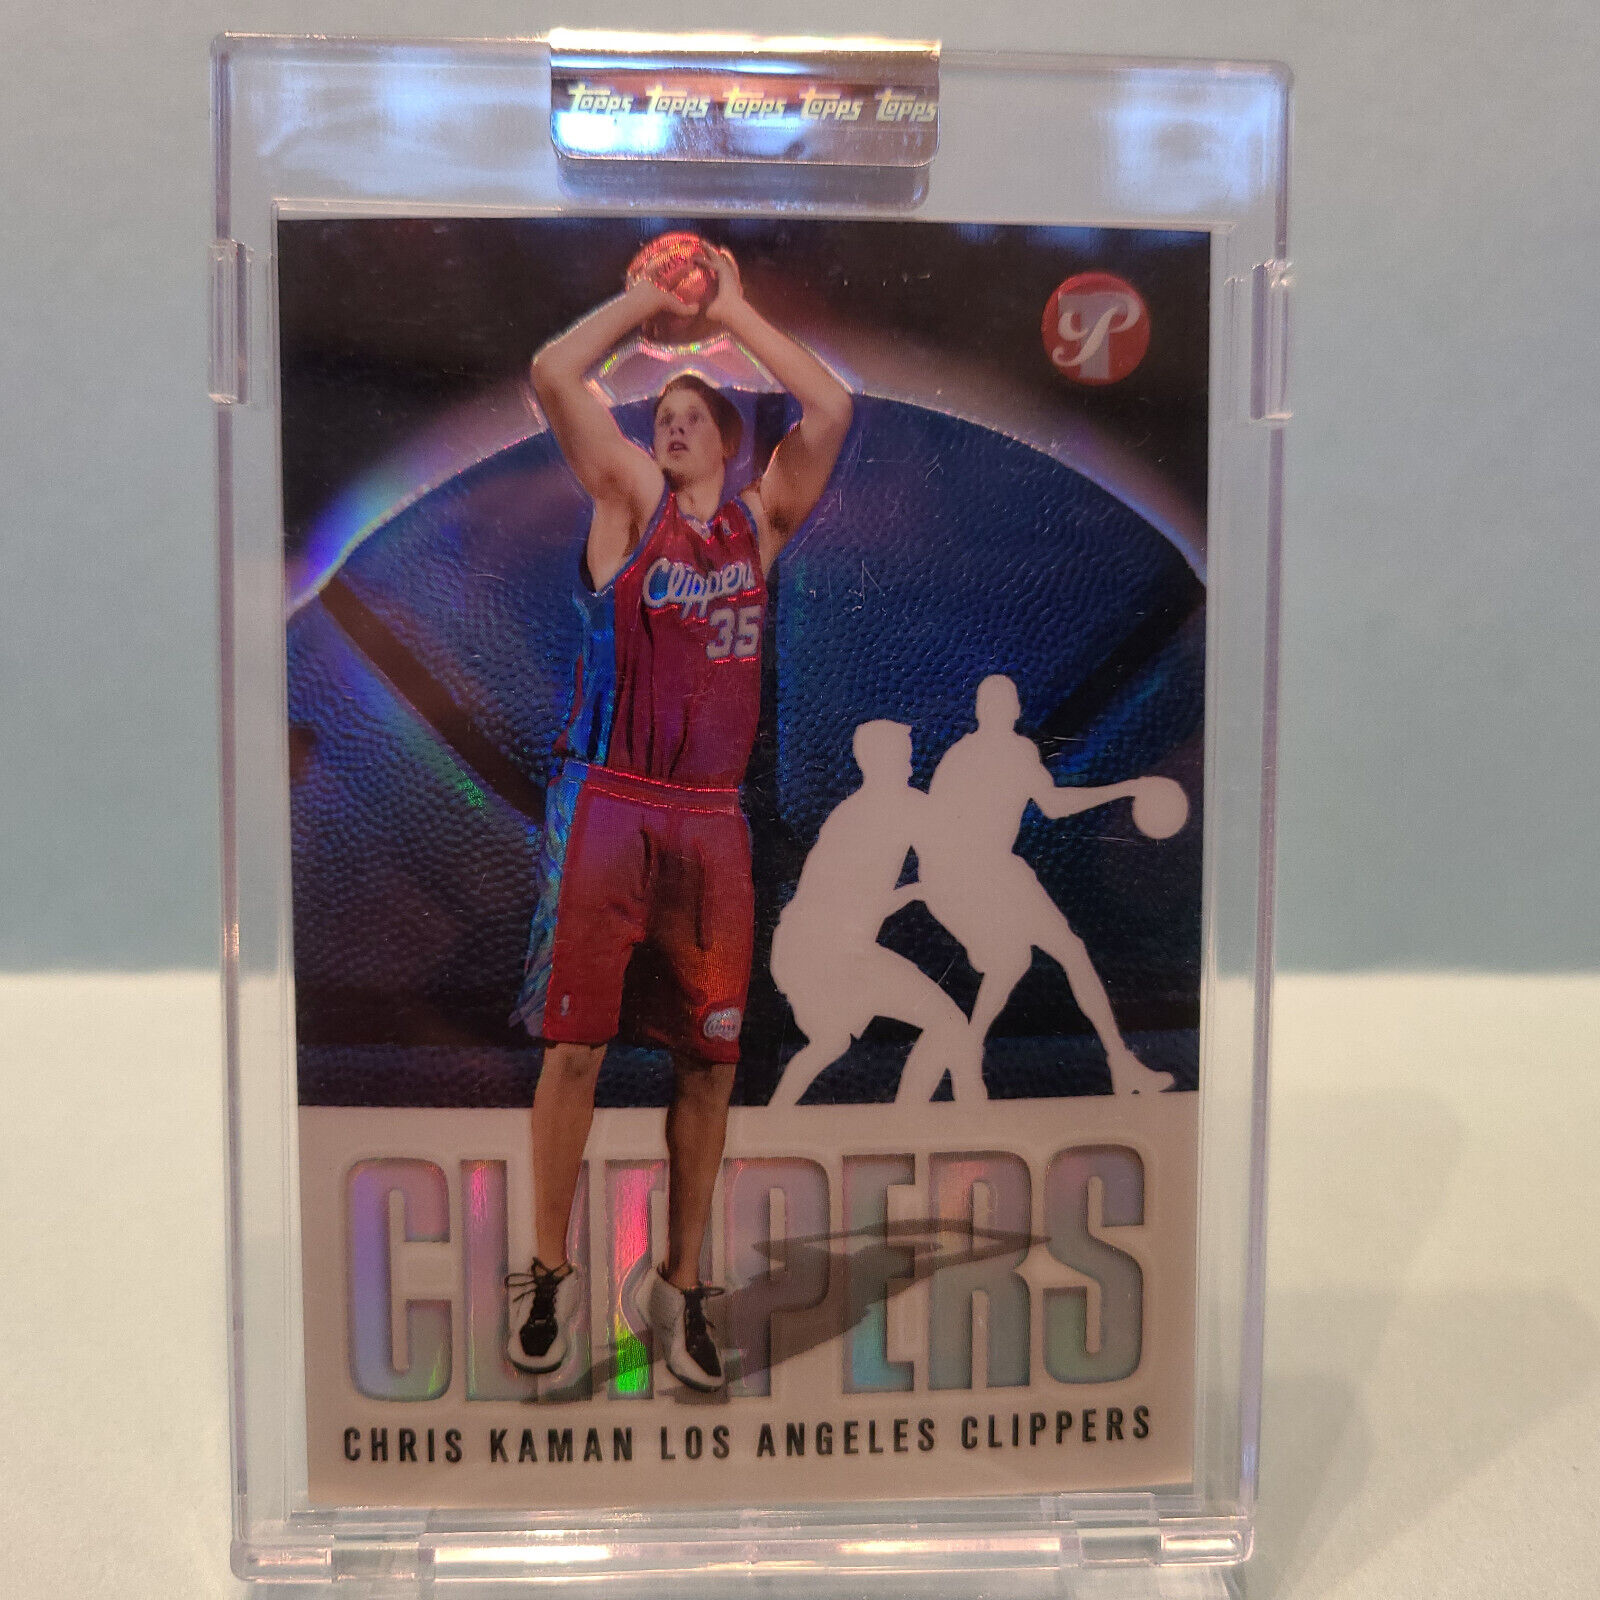 2003 Topps Pristine Chris Kaman #116 Refractor Rookie Card RC 1939/1999 Clippers. rookie card picture